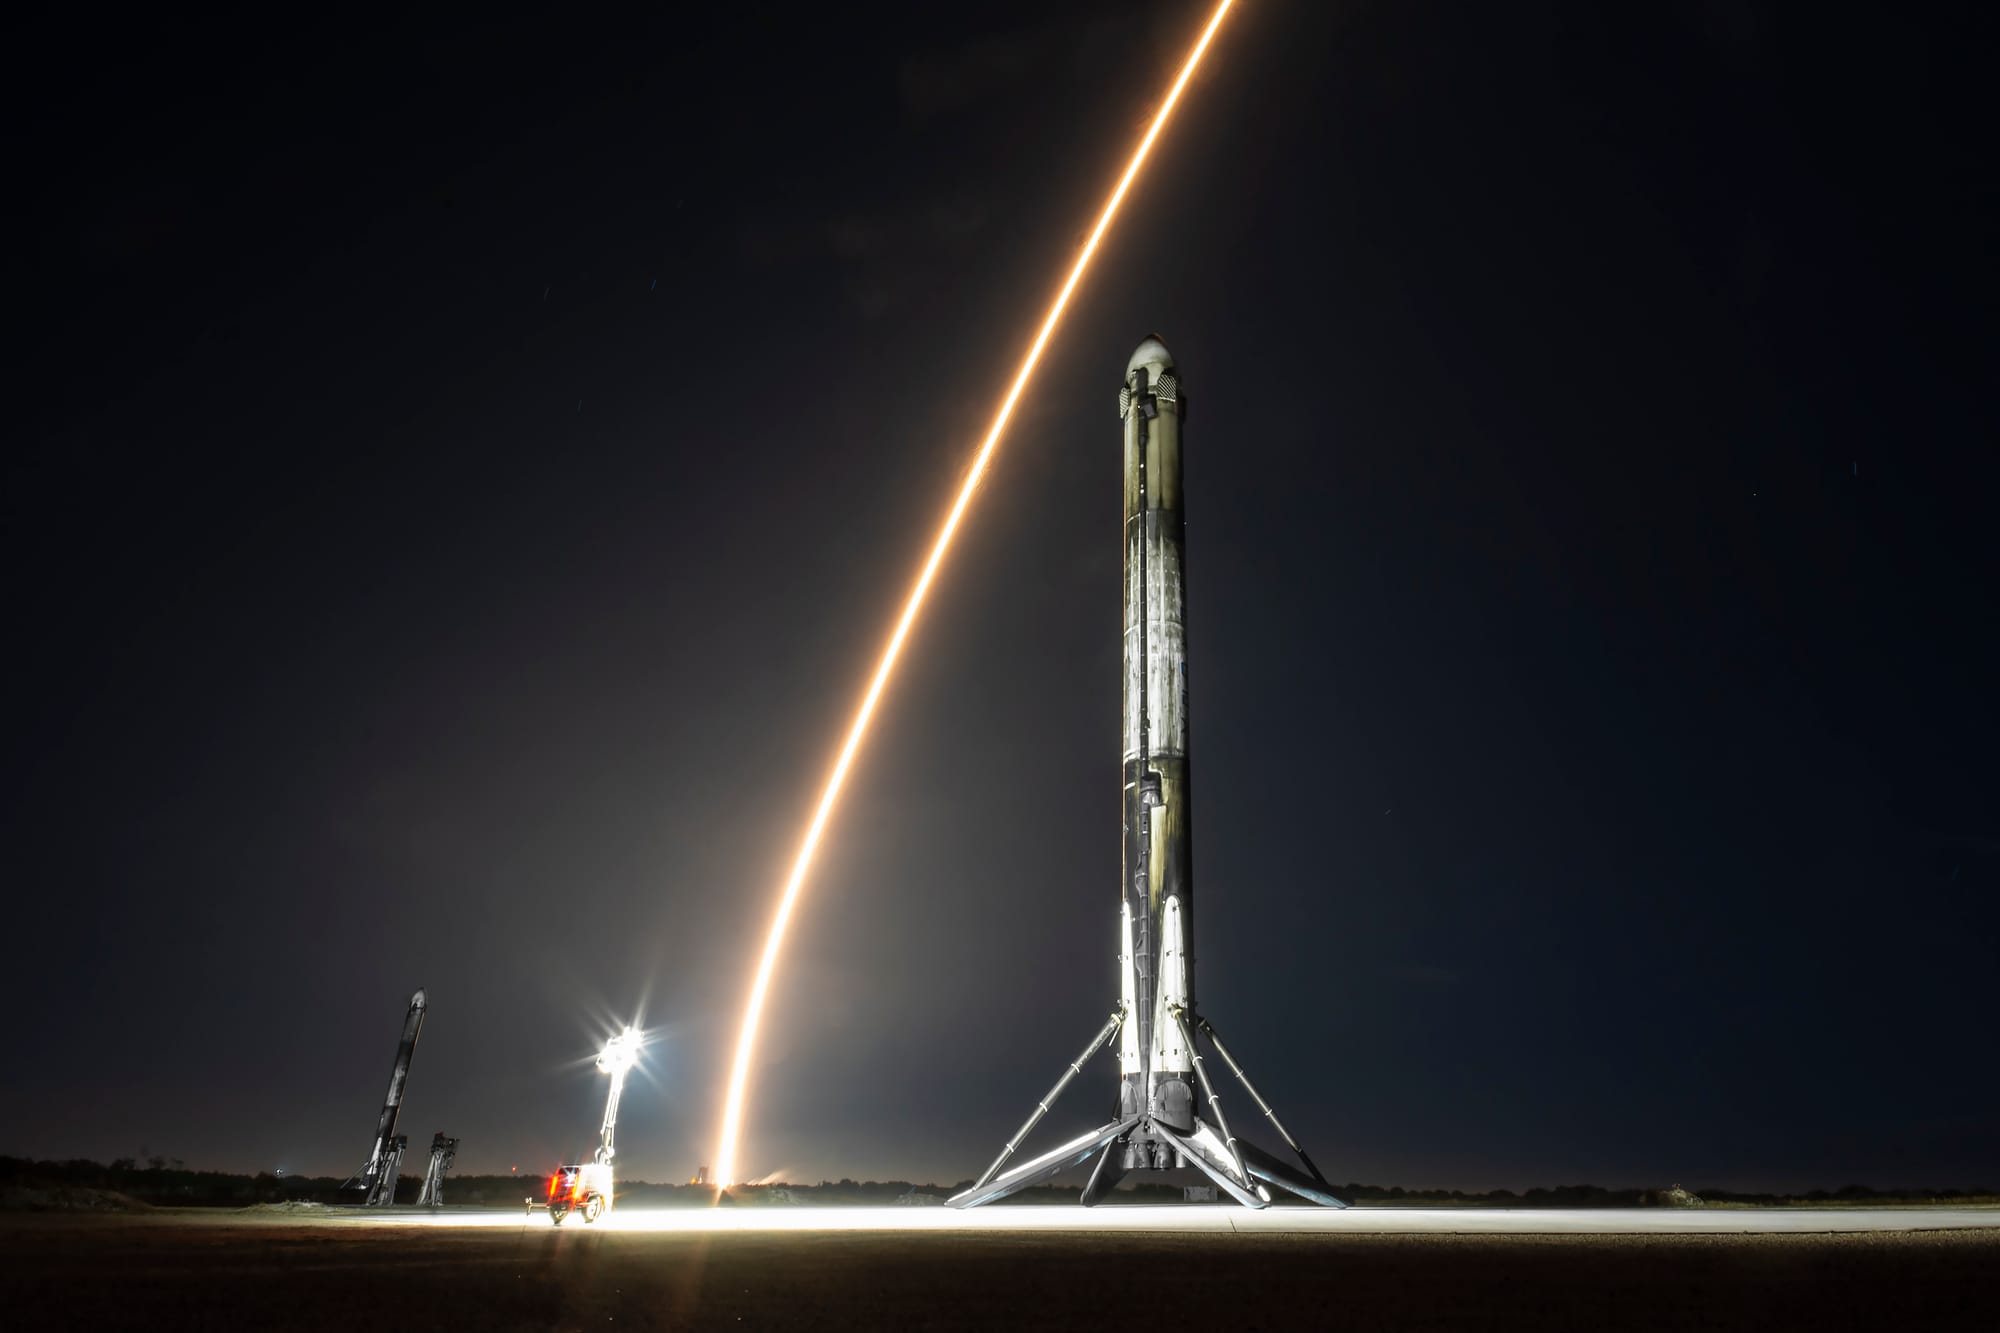 Long exposure photo of the Starlink Group 6-36 mission in the background with Falcon Heavy boosters B1064 and B1065 in the foreground. ©SpaceX